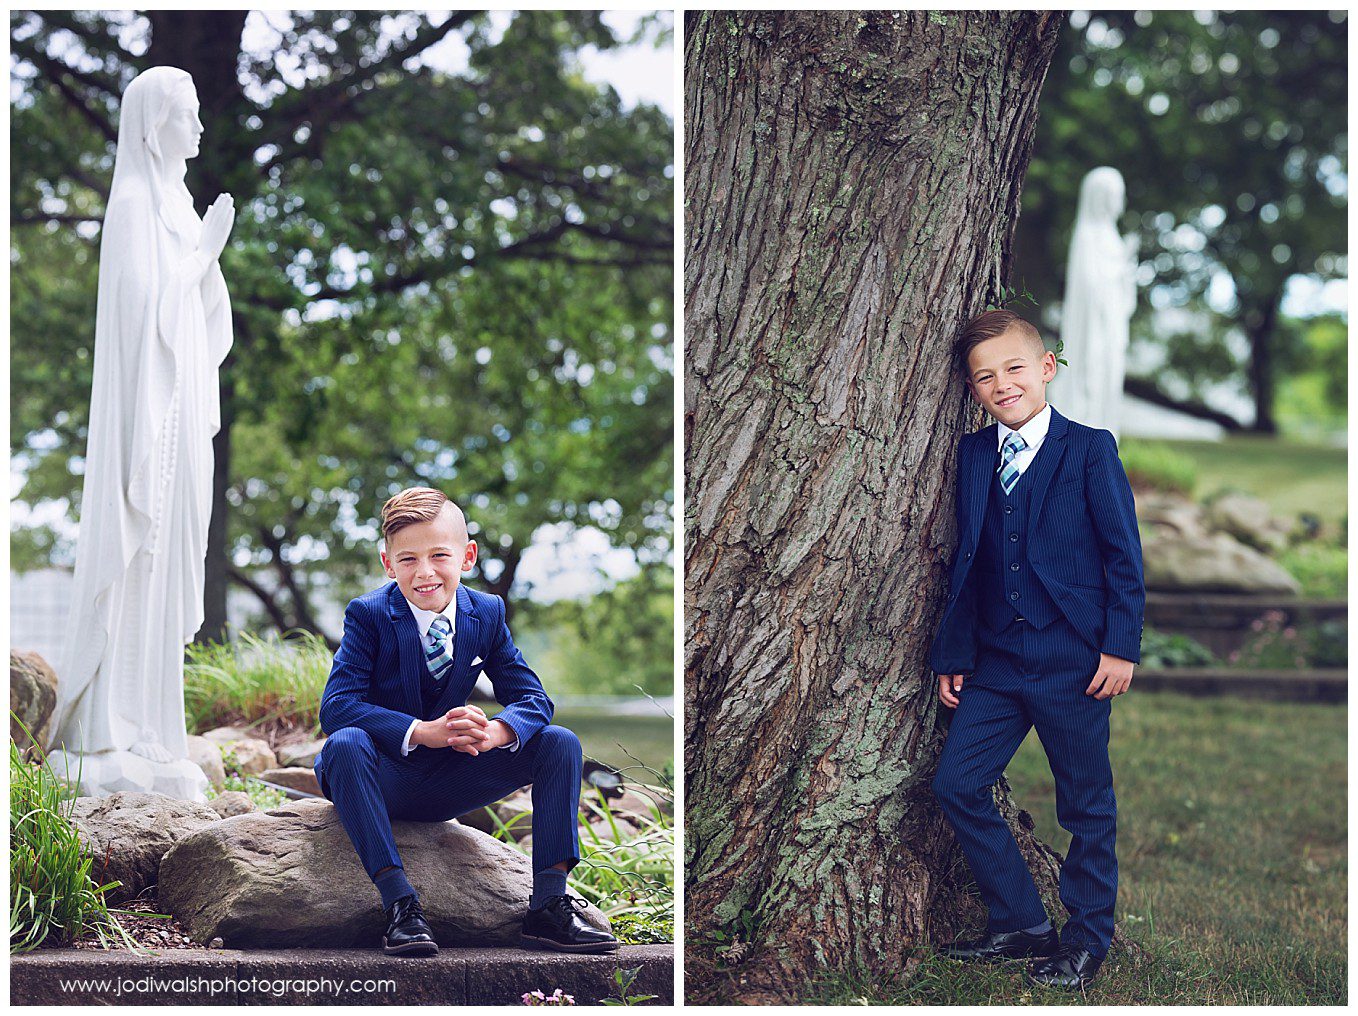 images of a young boy wearing a blue suit for his first holy communion in a garden with a statue of Mary